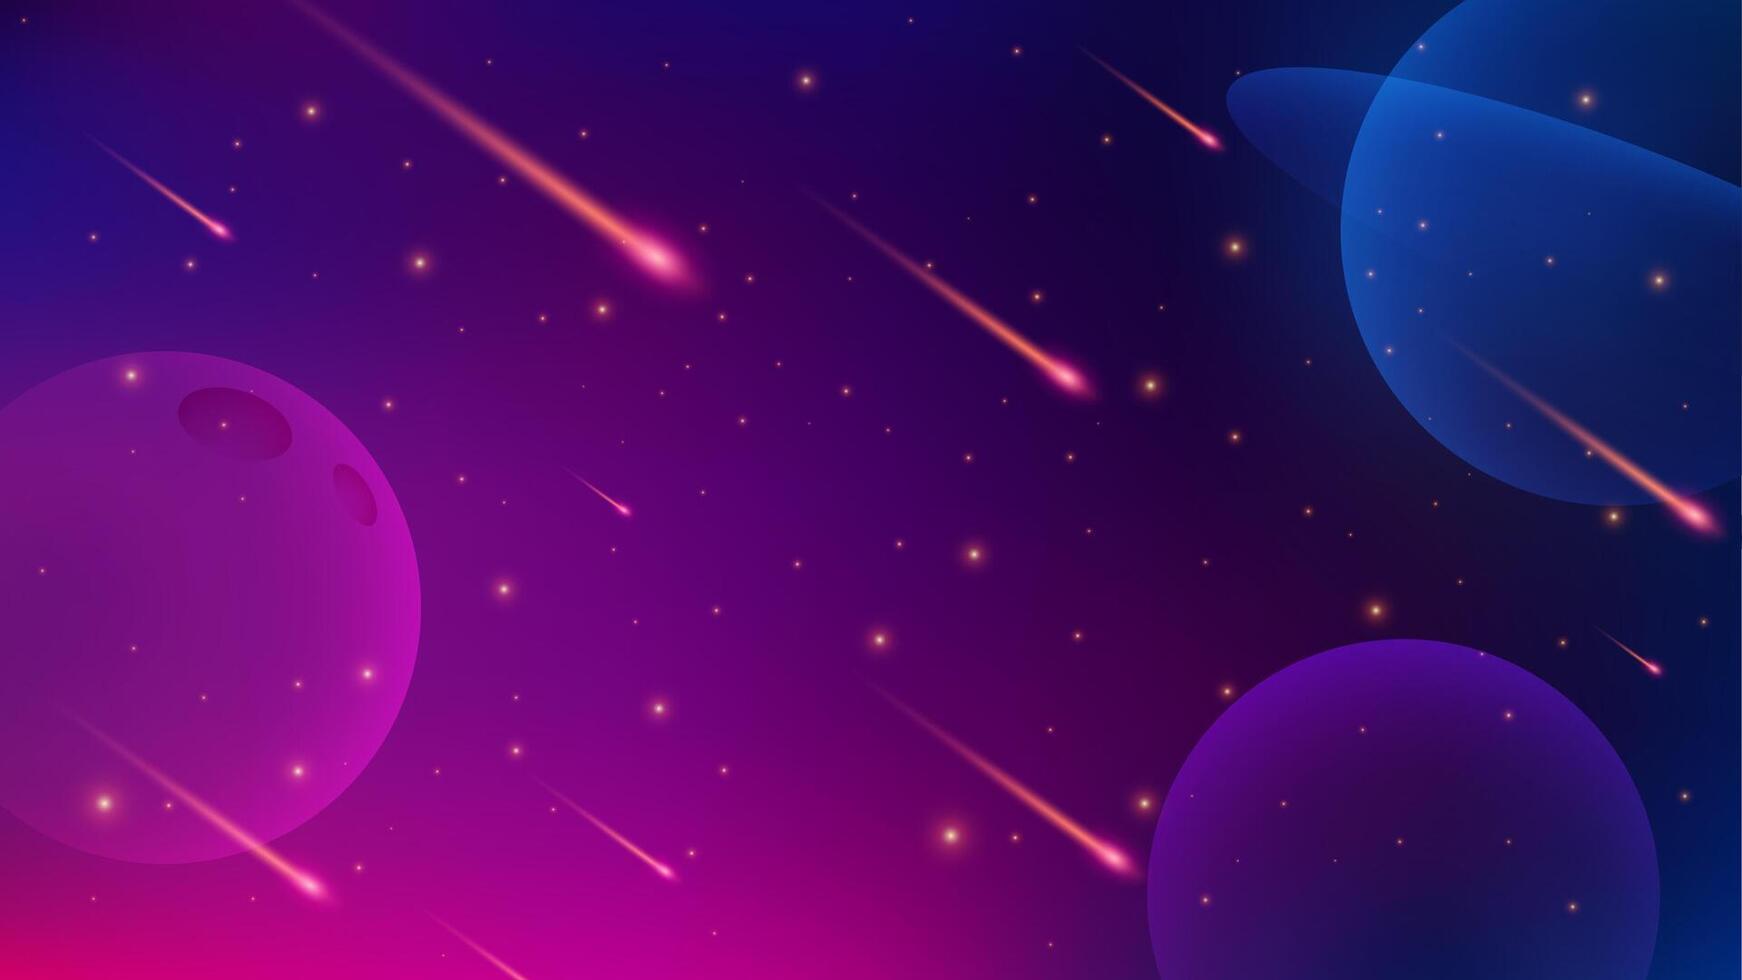 Galaxy Background with Planets and Nebula, Cosmos Milky Way, Vector Illustration